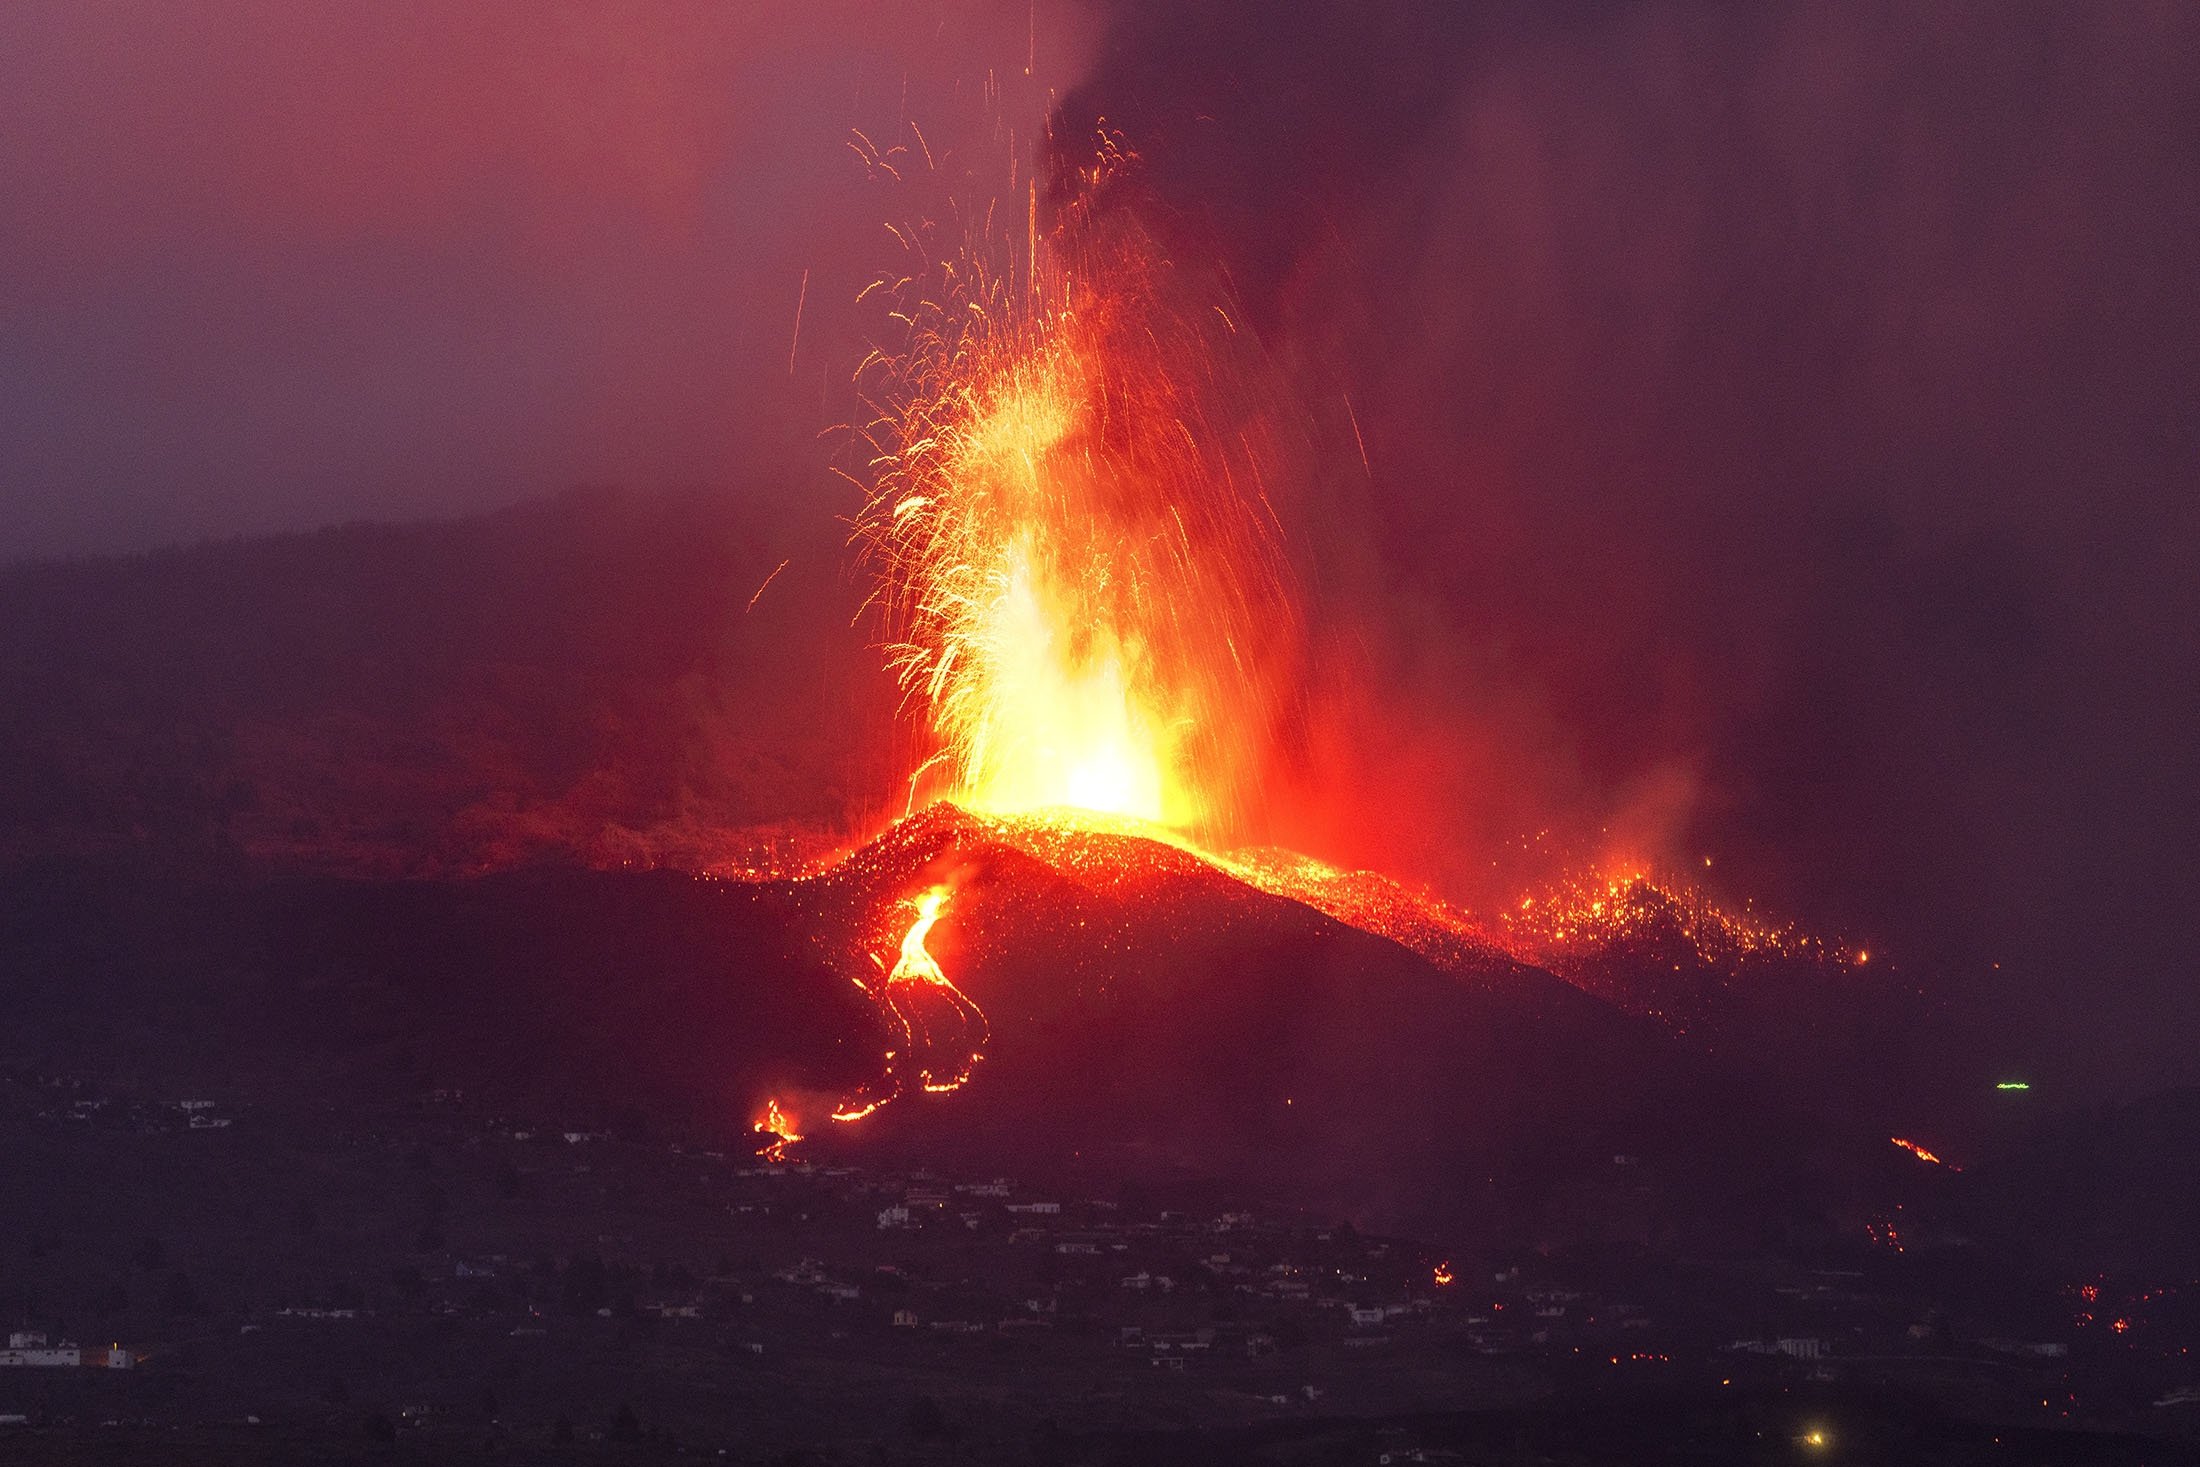 Lava from a volcano eruption flows on the island of La Palma in the Canaries, Spain, Sept. 21, 2021. (AP Photo)